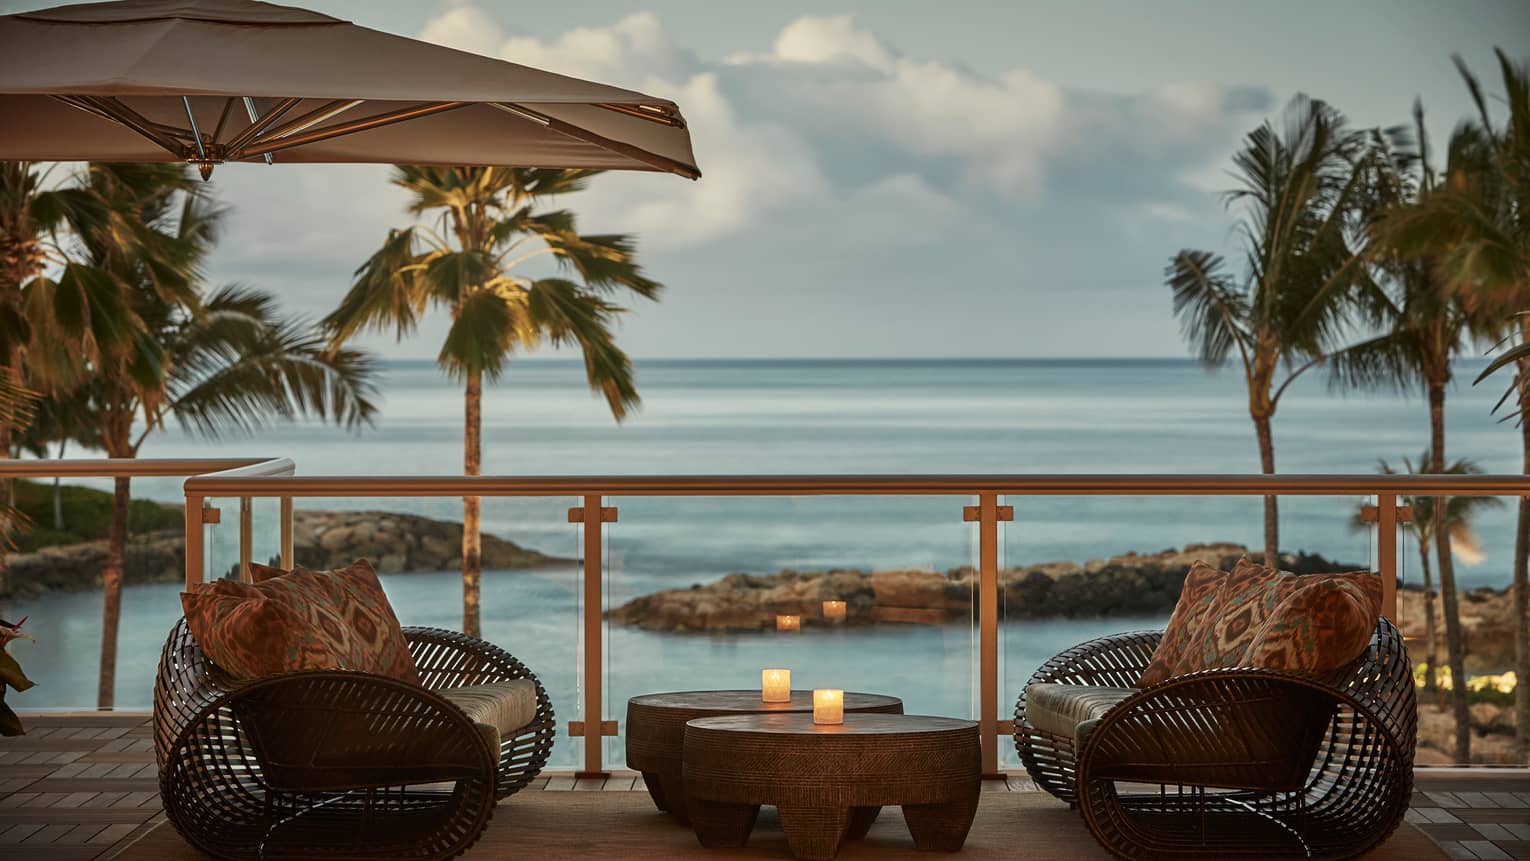 Large rattan chairs with print pillows, table with candles on Hokulea patio at sunset